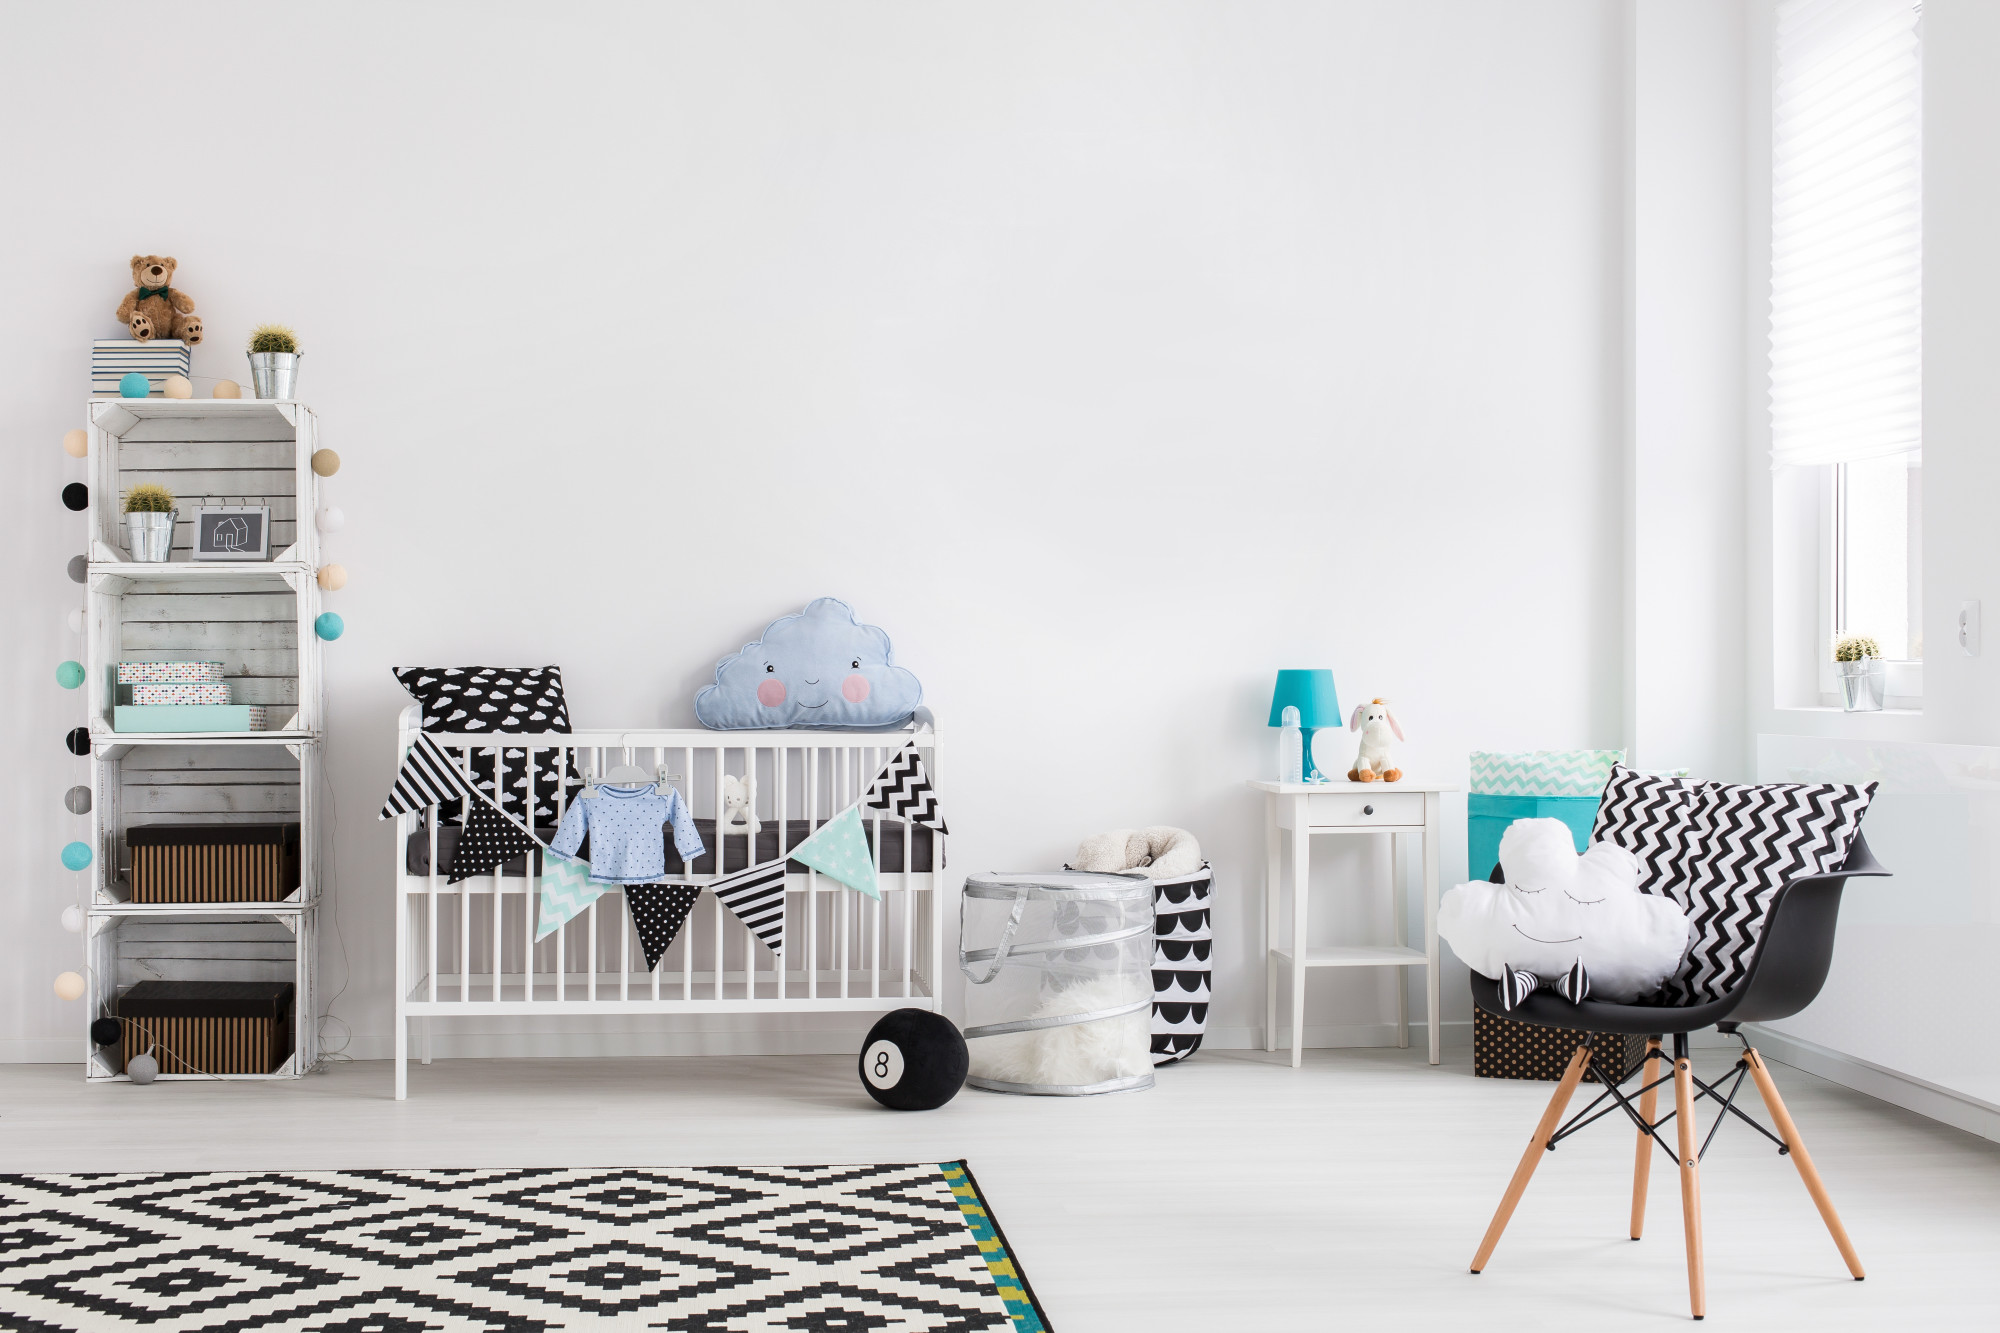 One of the best parts about getting ready to bring your baby home is designing a beautiful nursery. Let us help you out with this quick guide to nursery design.